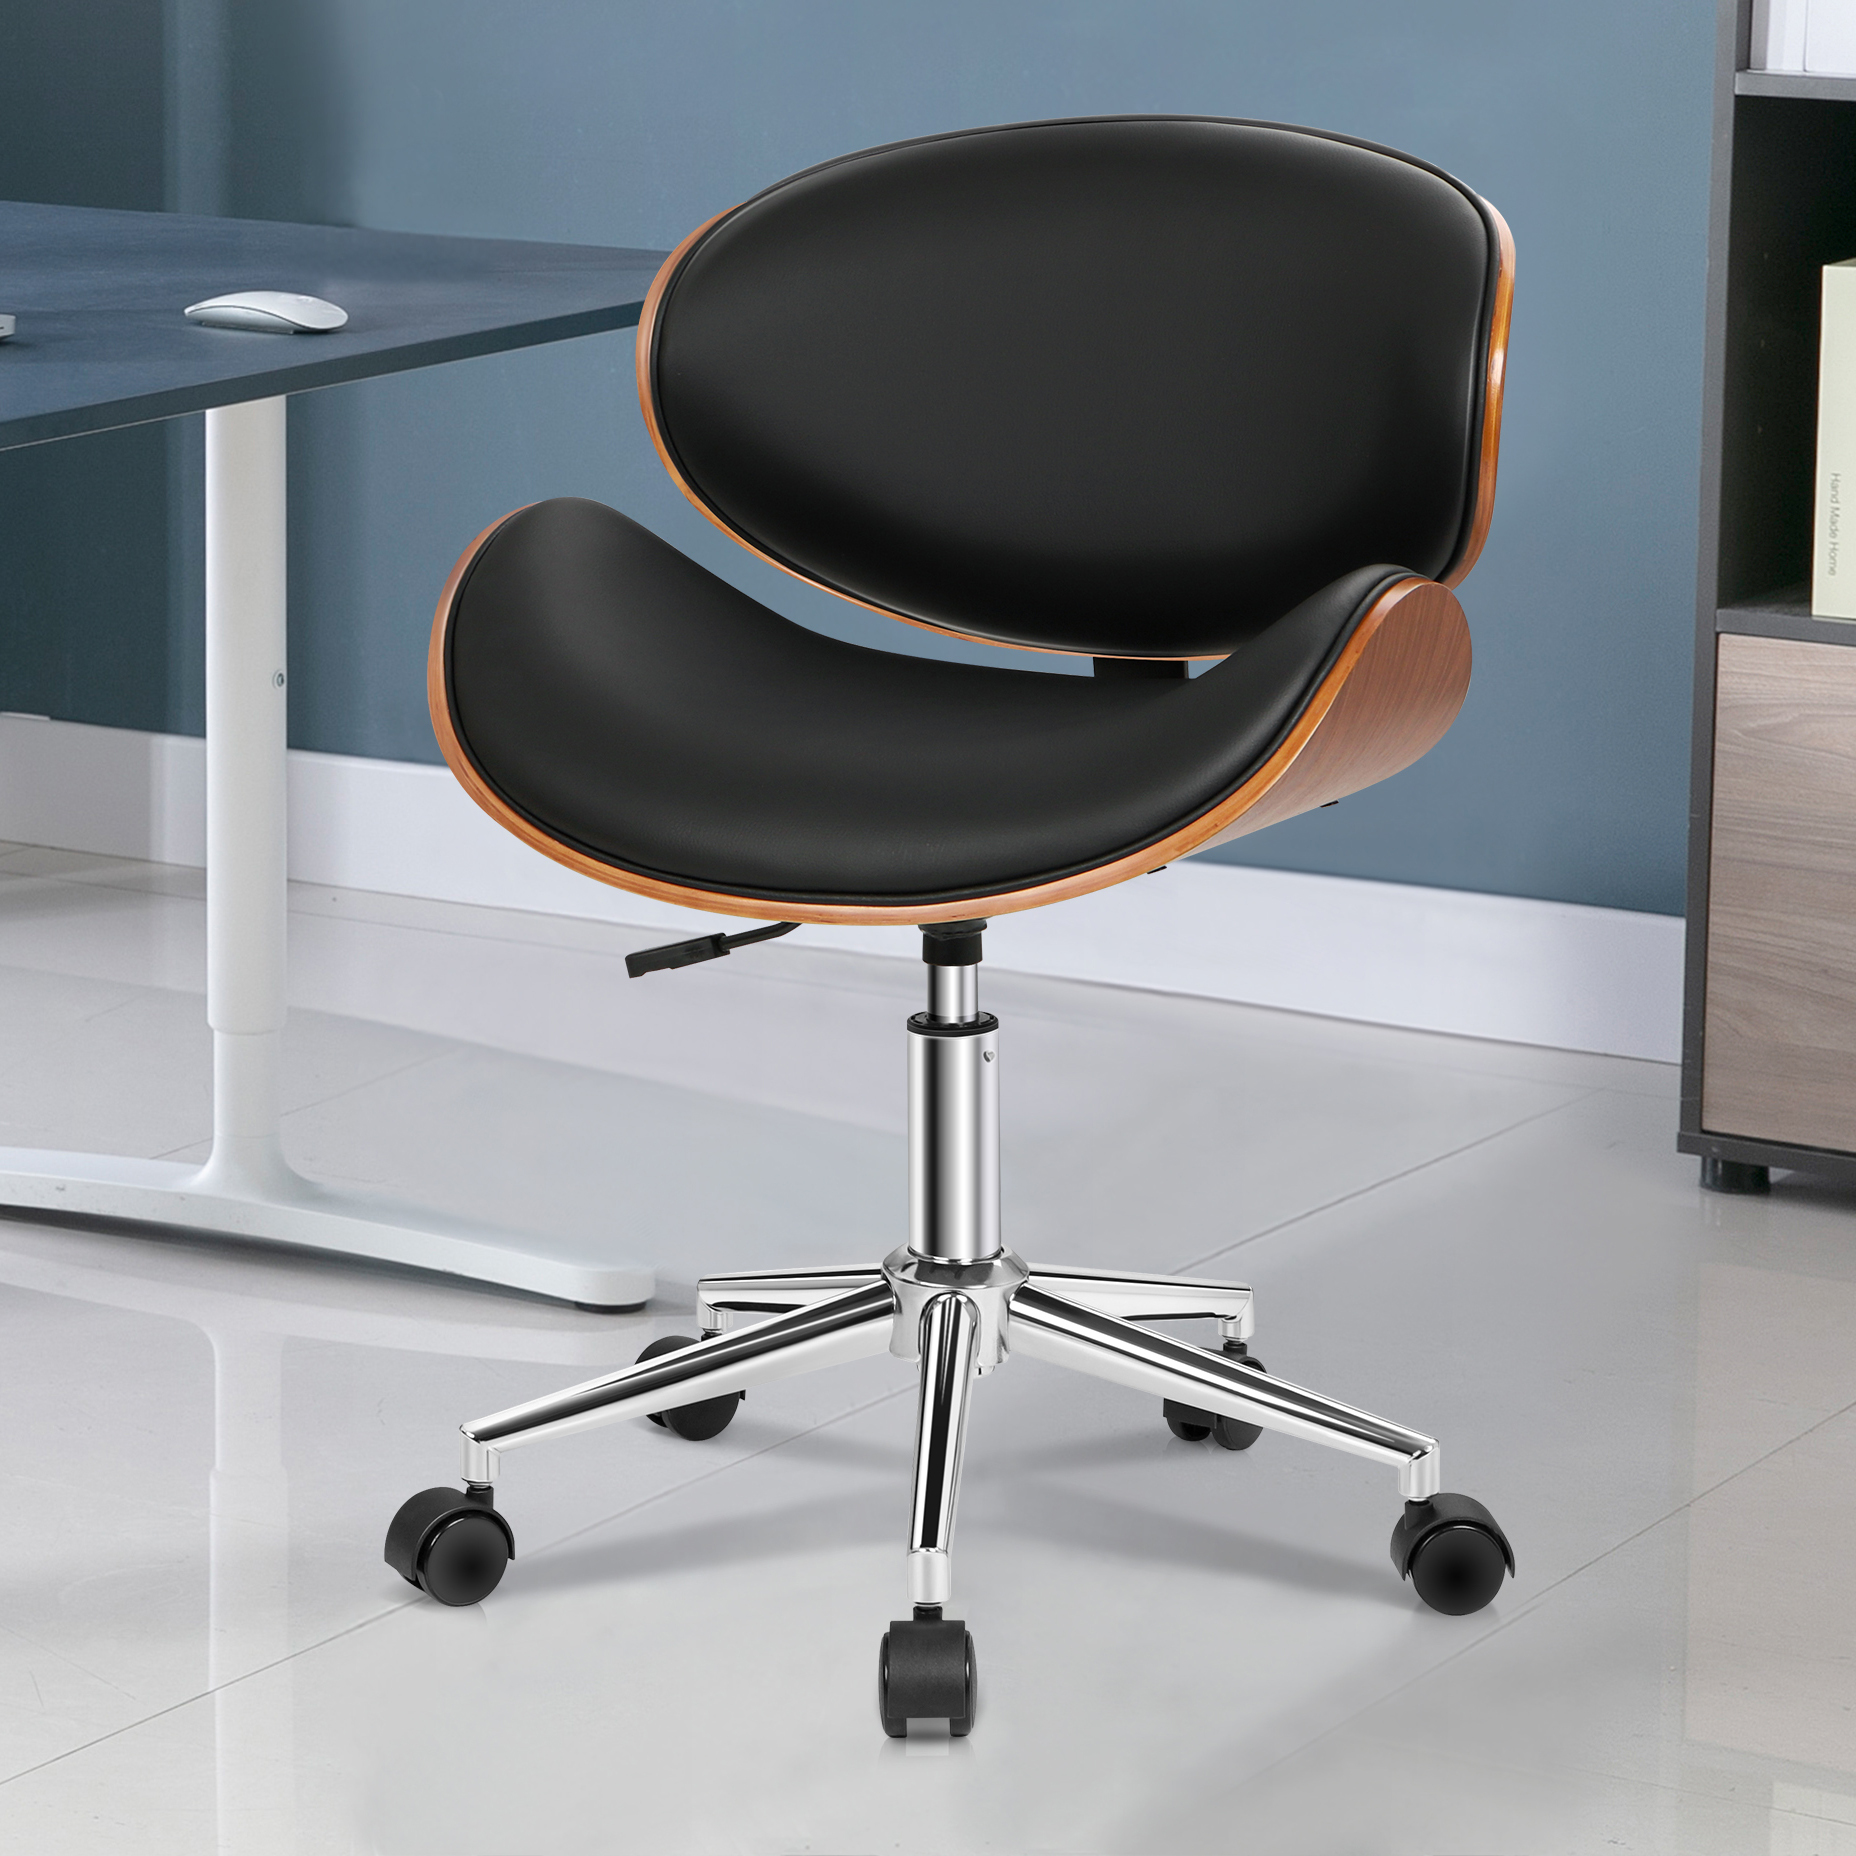 HoxtonRoom Kingsley PU Leather Office Chair | Temple & Webster